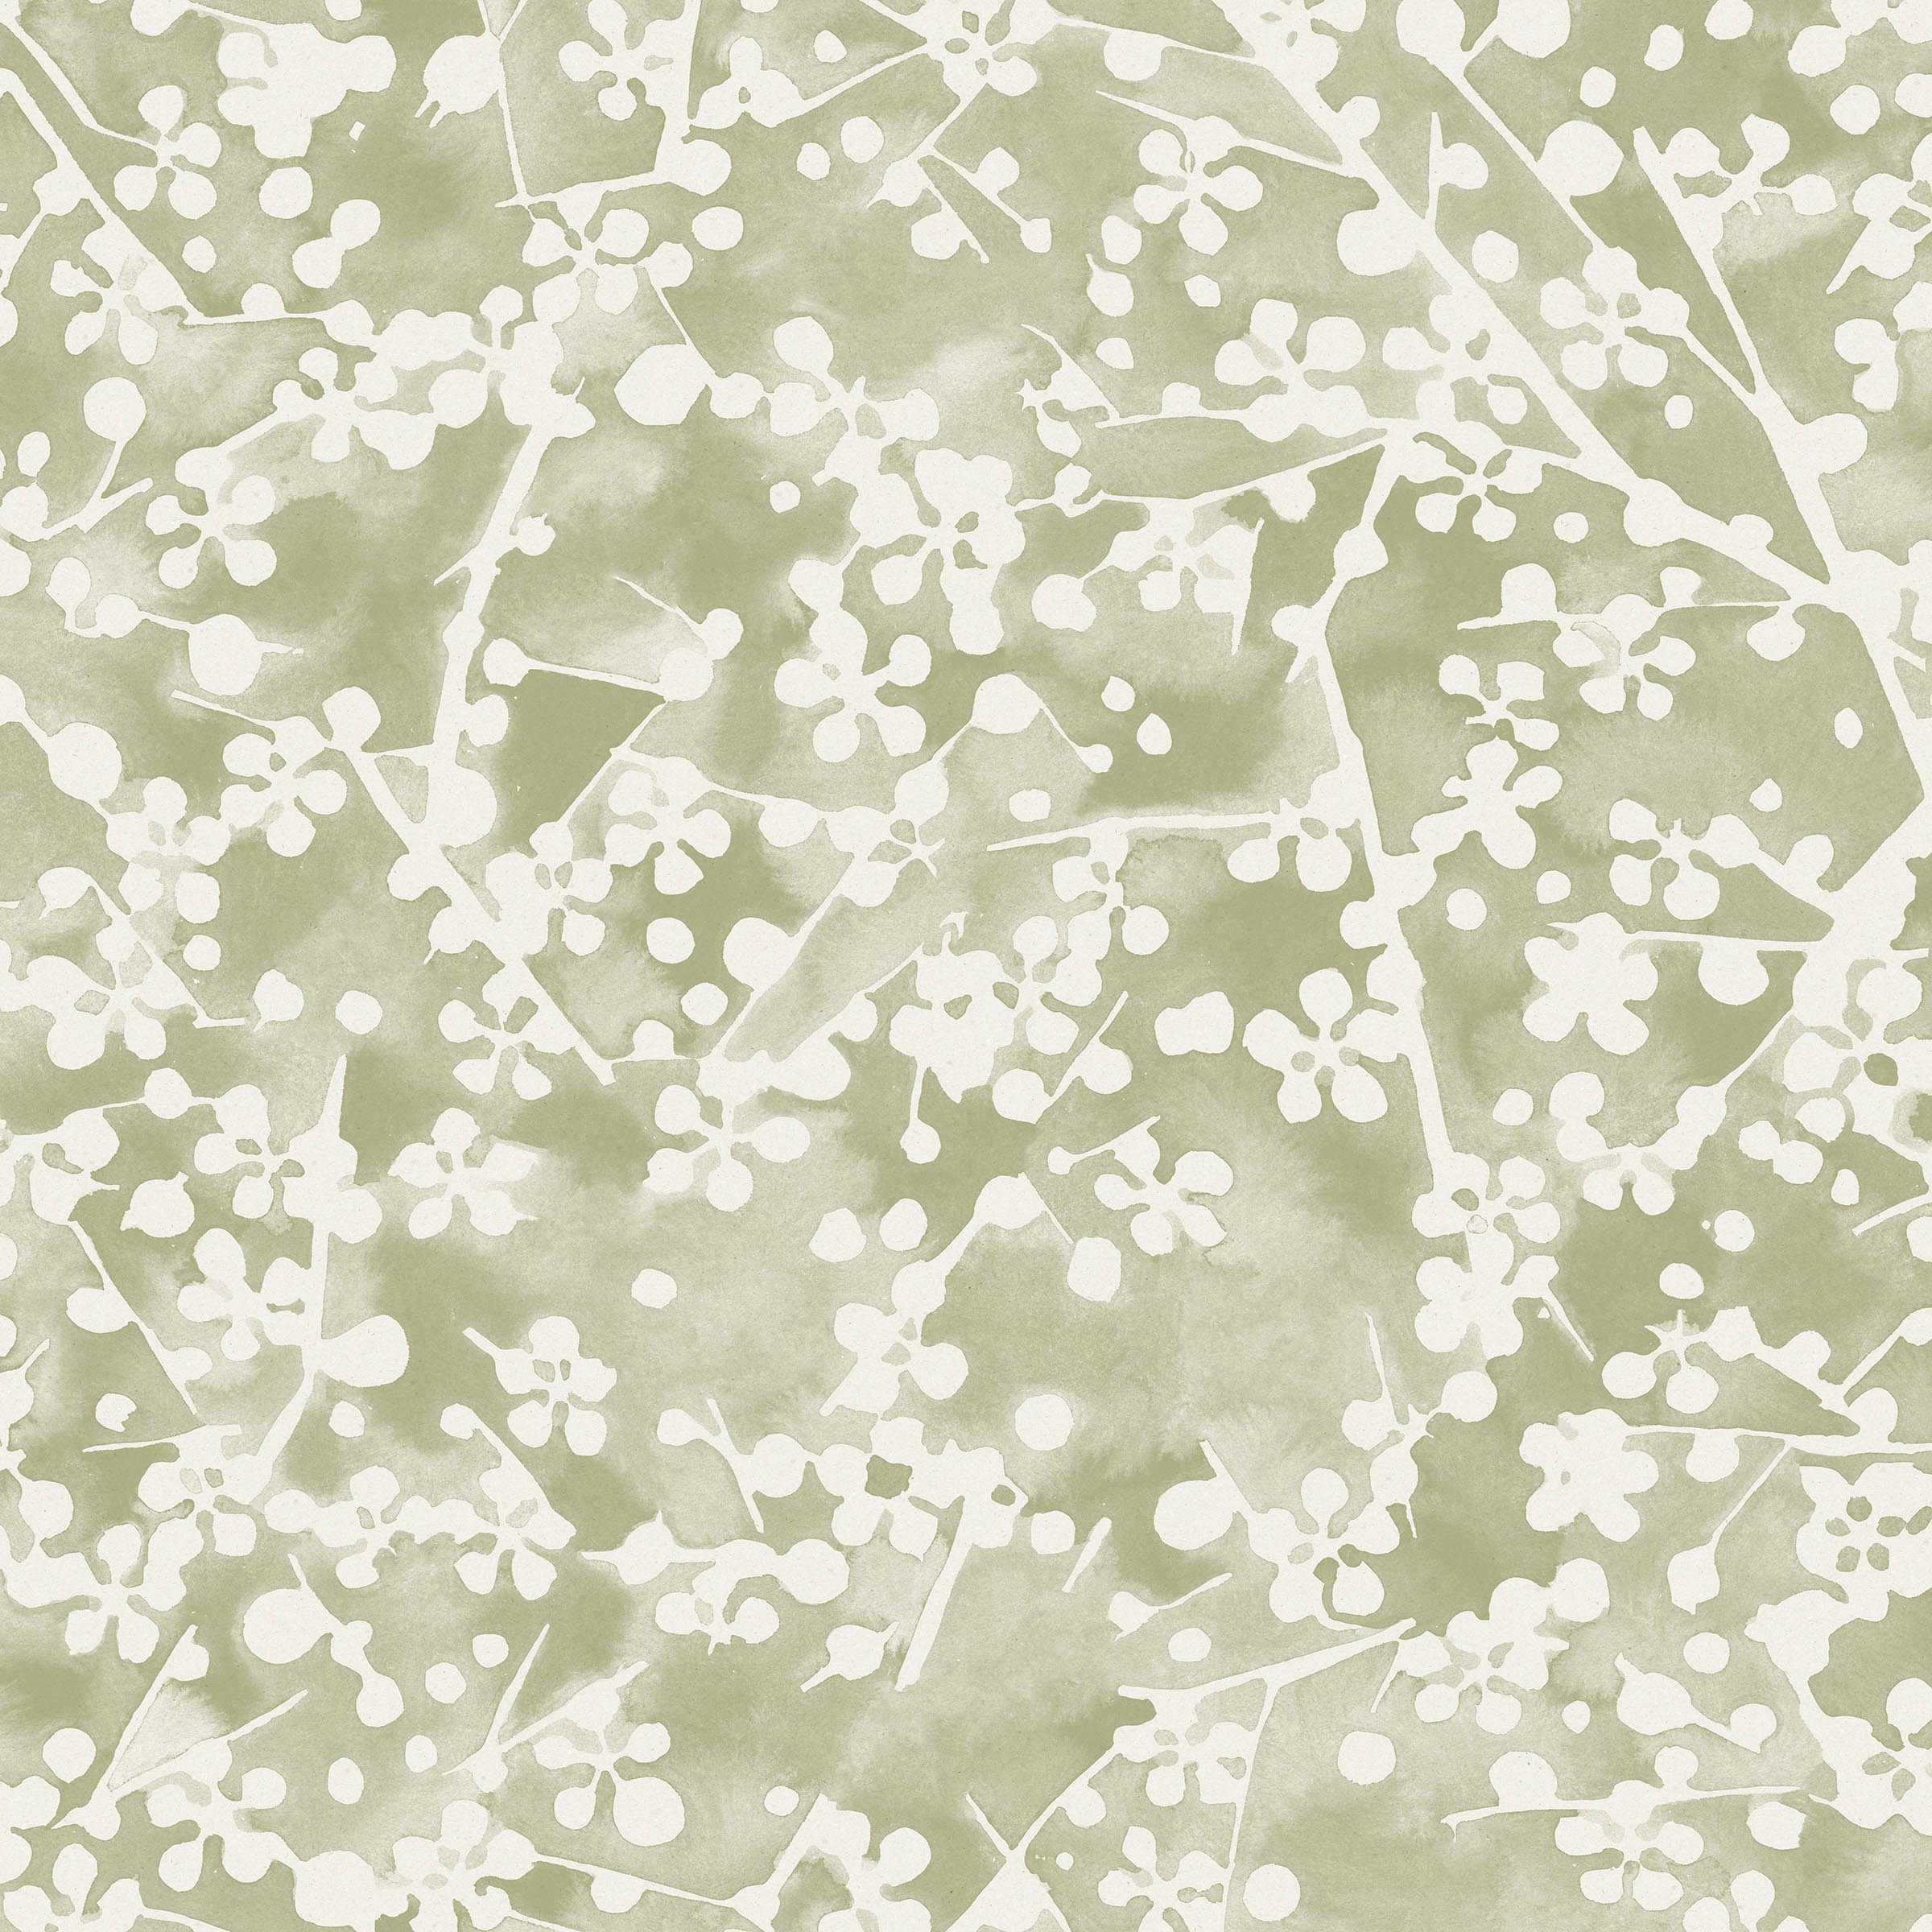 Detail of wallpaper in a painterly branch print in white on a light green watercolor field.